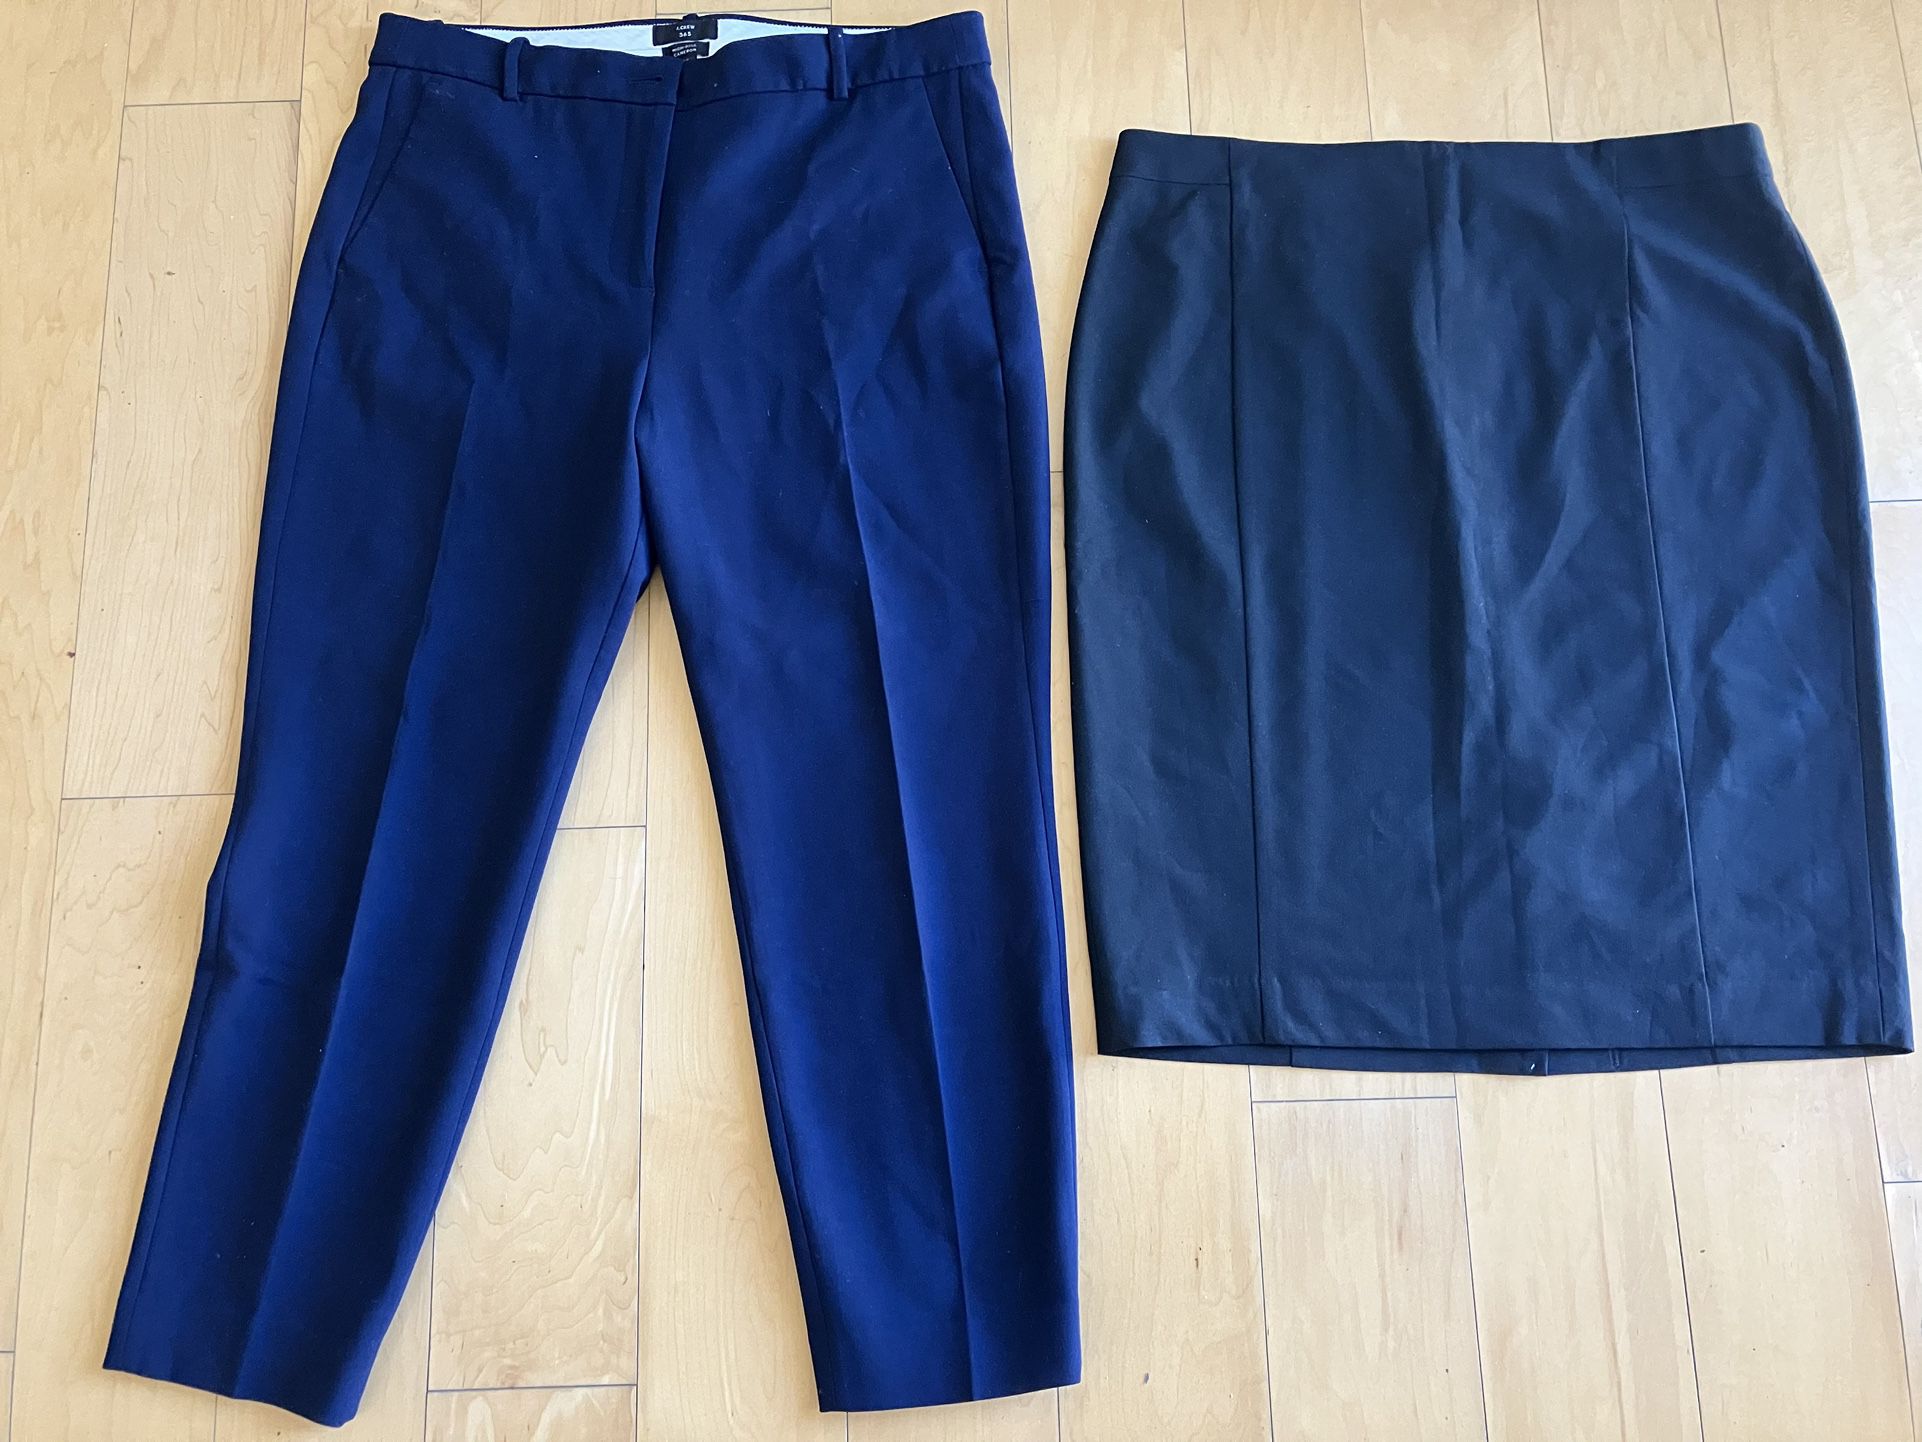 J Crew Navy Pants/ Ann Taylor black skirt Size 14 TOGETHER  or SEPARATELY